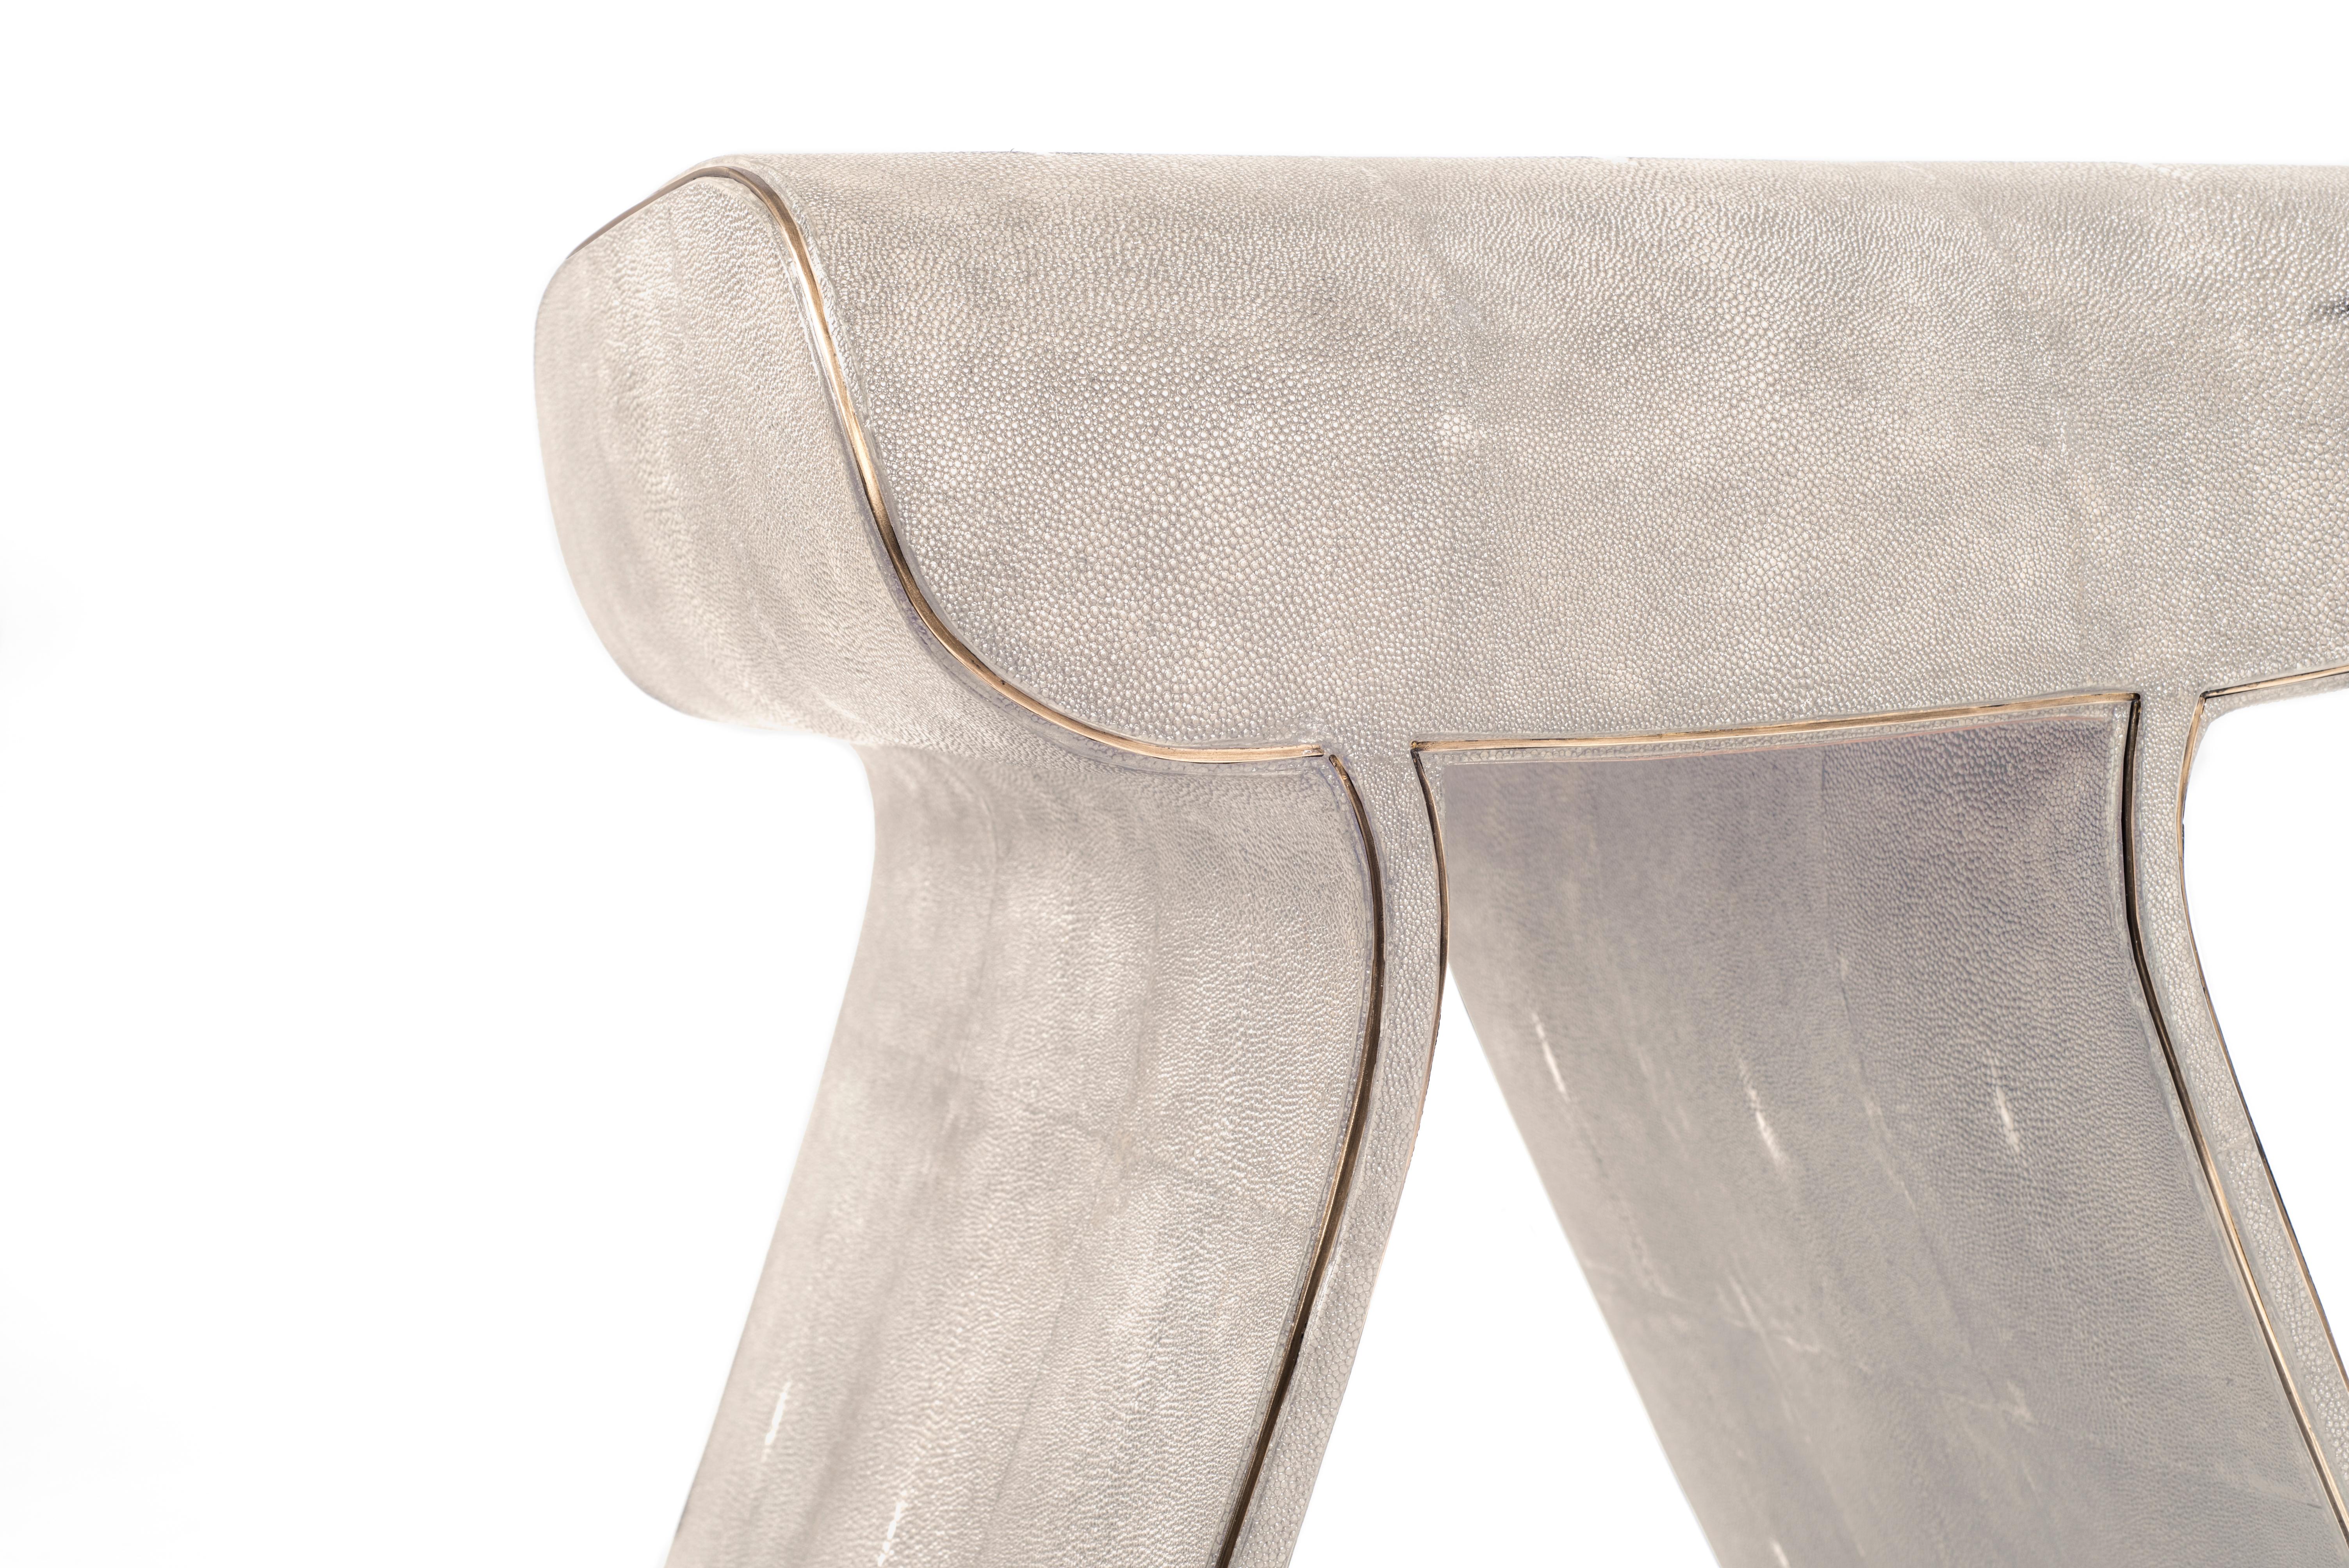 Contemporary Dandy Stool Upholstered in Cream Fur & Bronze-Patina Brass Details by Kifu Paris For Sale